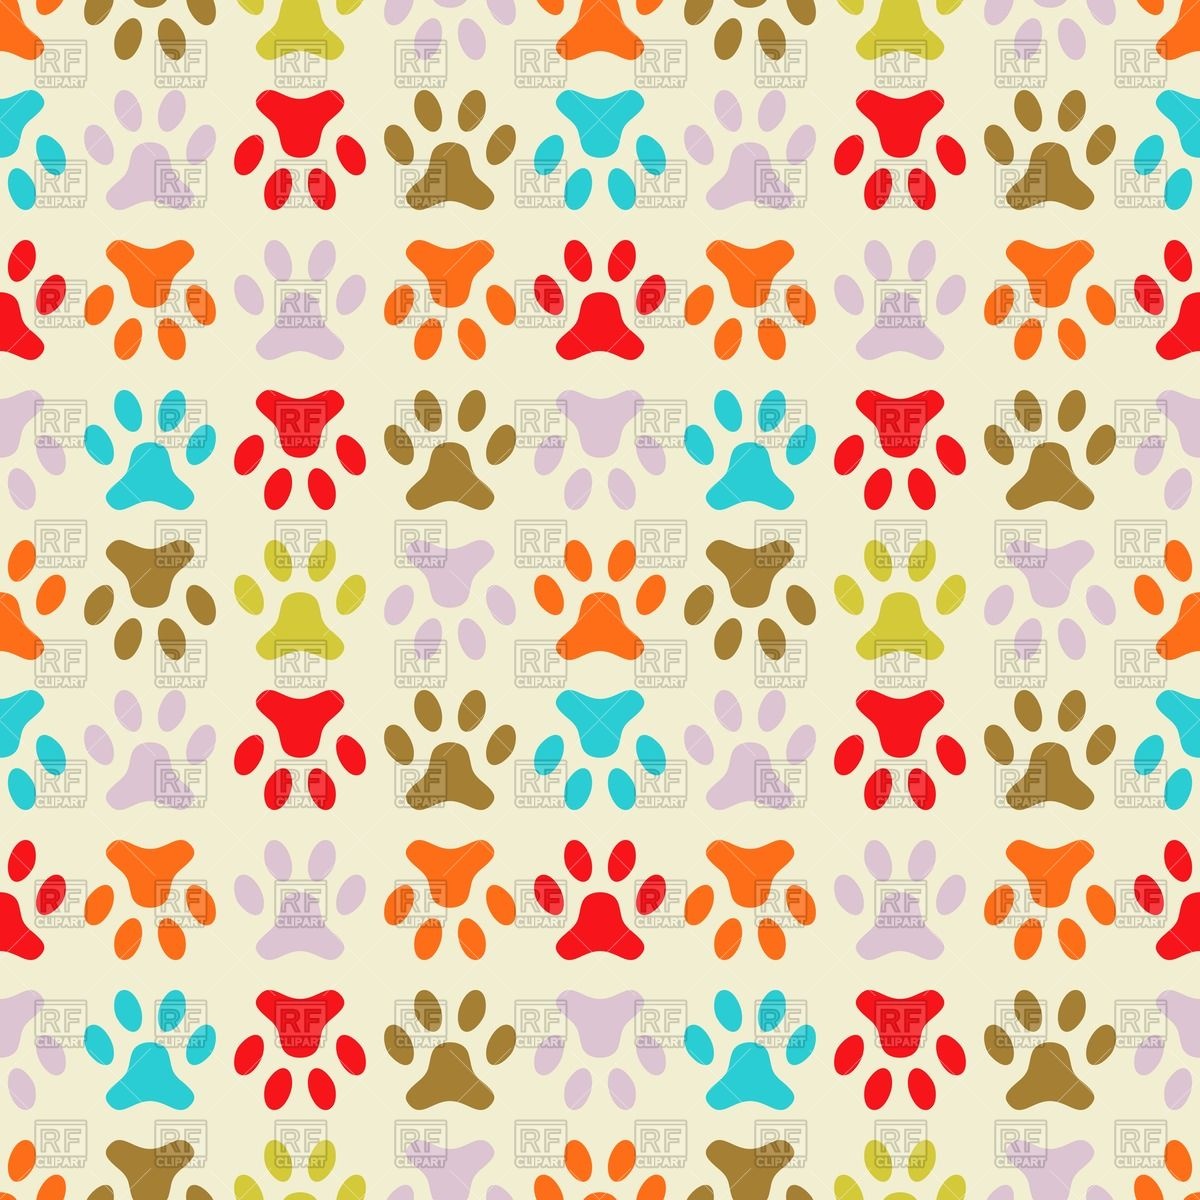 Colorful Wallpaper With Dog S Paw Prints Background Textures